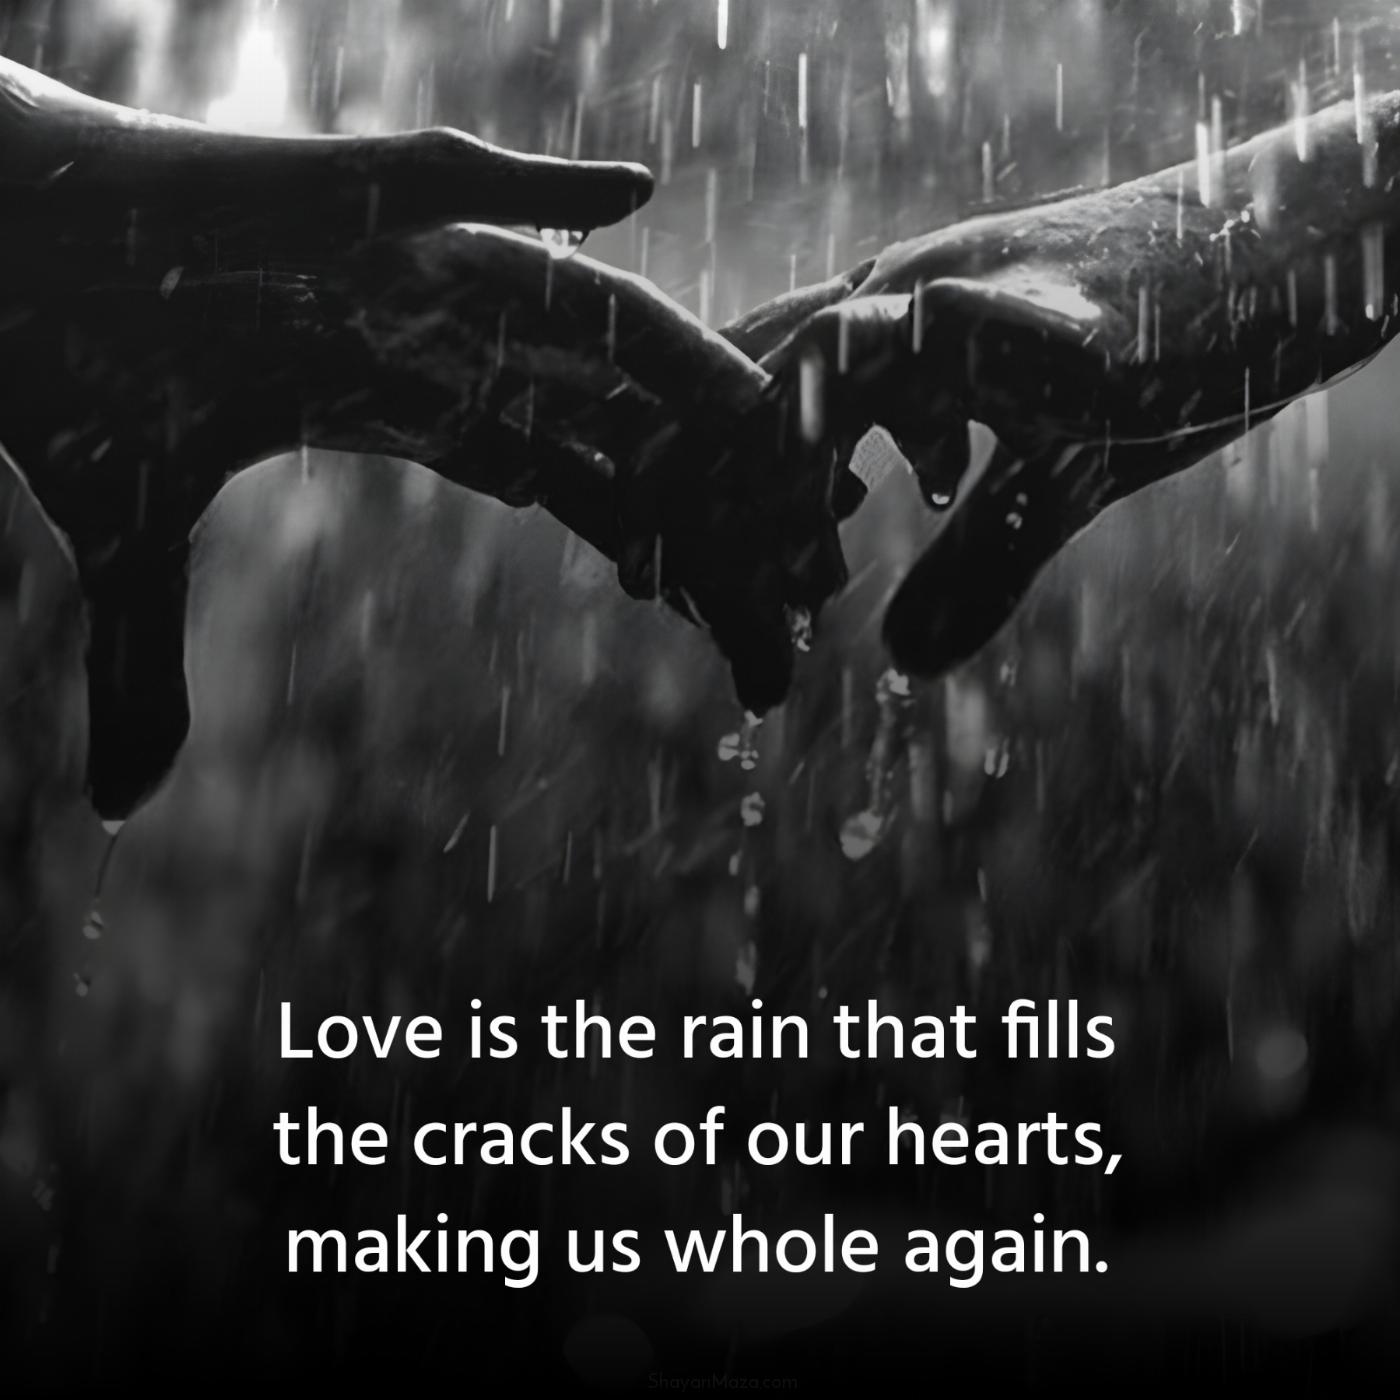 Love is the rain that fills the cracks of our hearts